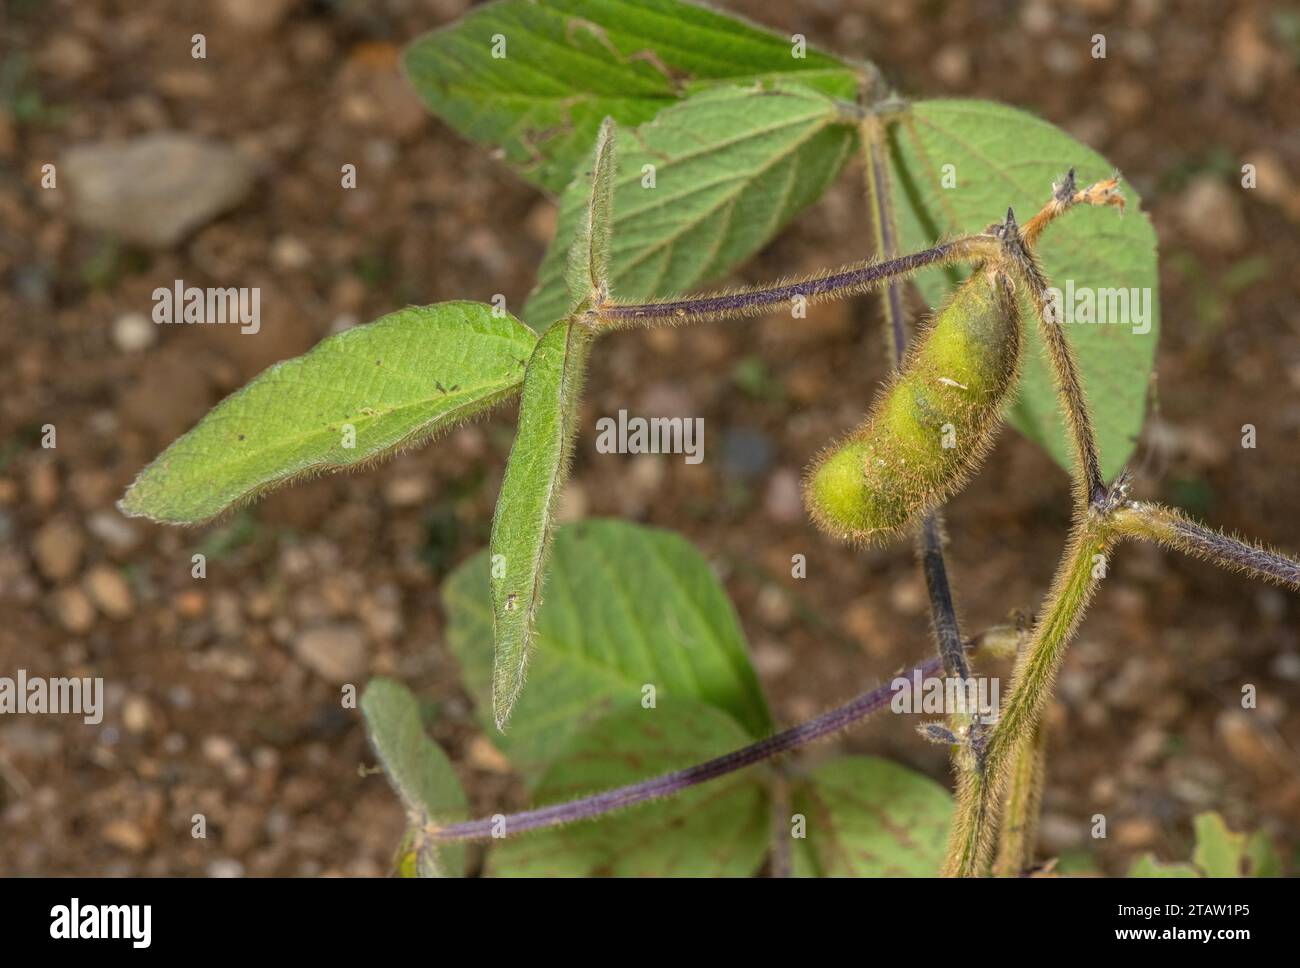 Soya Bean, Glycine max, in fruit. Widely-grown as a protein-rich crop. Stock Photo